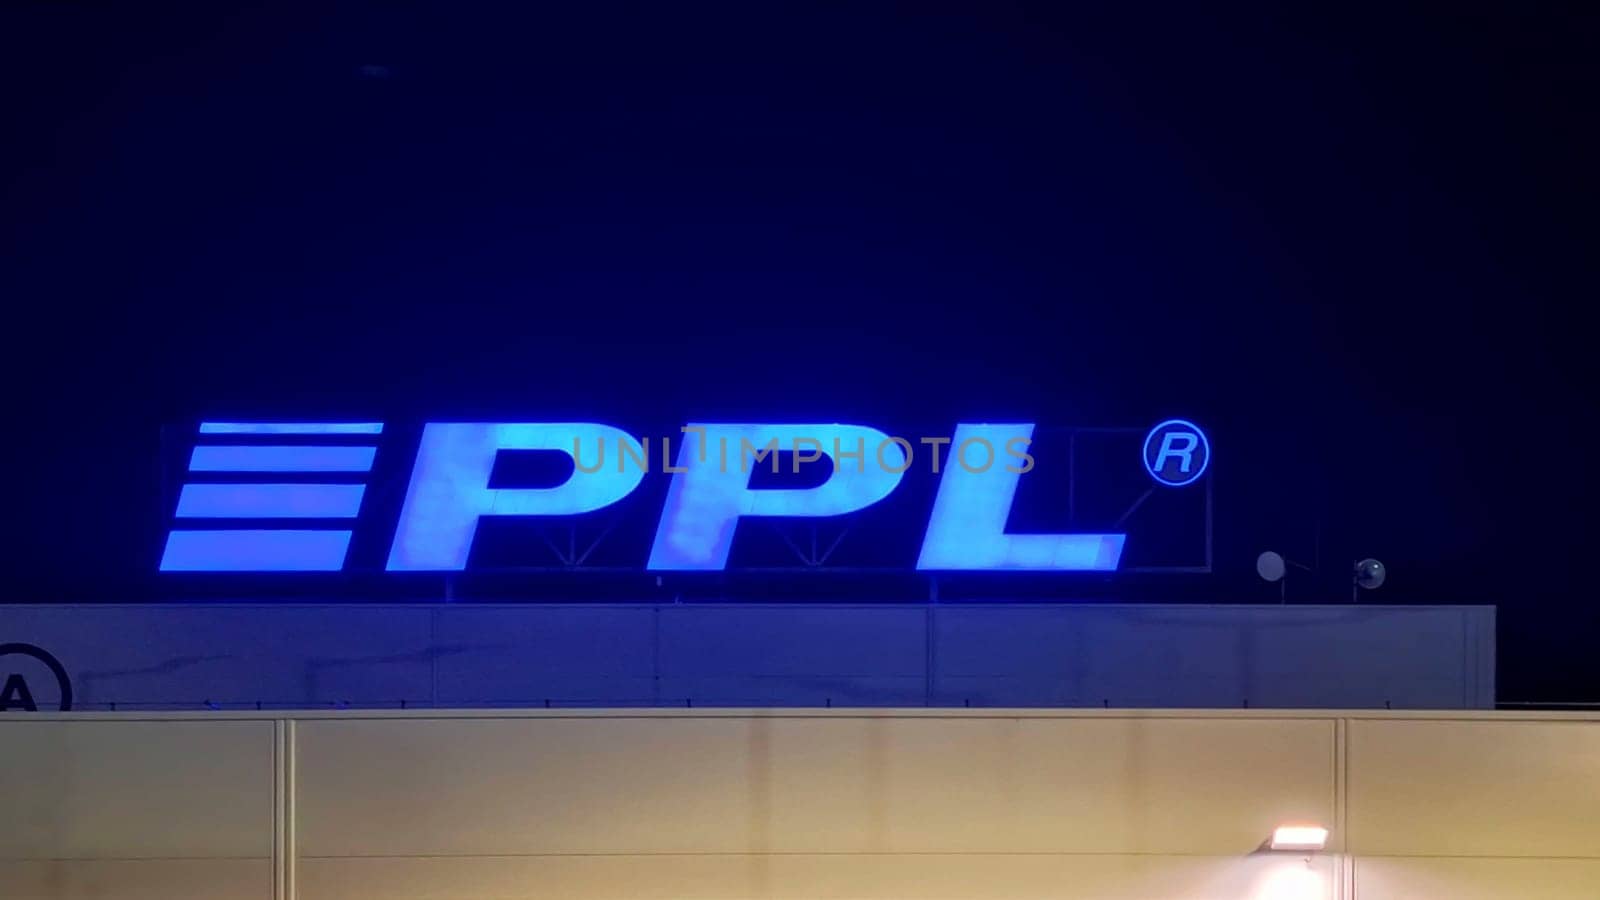 HUSTOPECE, CZECH REPUBLIC - DECEMBER 14, 2023: PPL logo on the depot building. PPL CZ specializes in parcel transport not only in the Czech Republic, but also throughout Europe. It employs over 1000 staff and 2,000 drivers who deliver tens of millions of shipments every year.